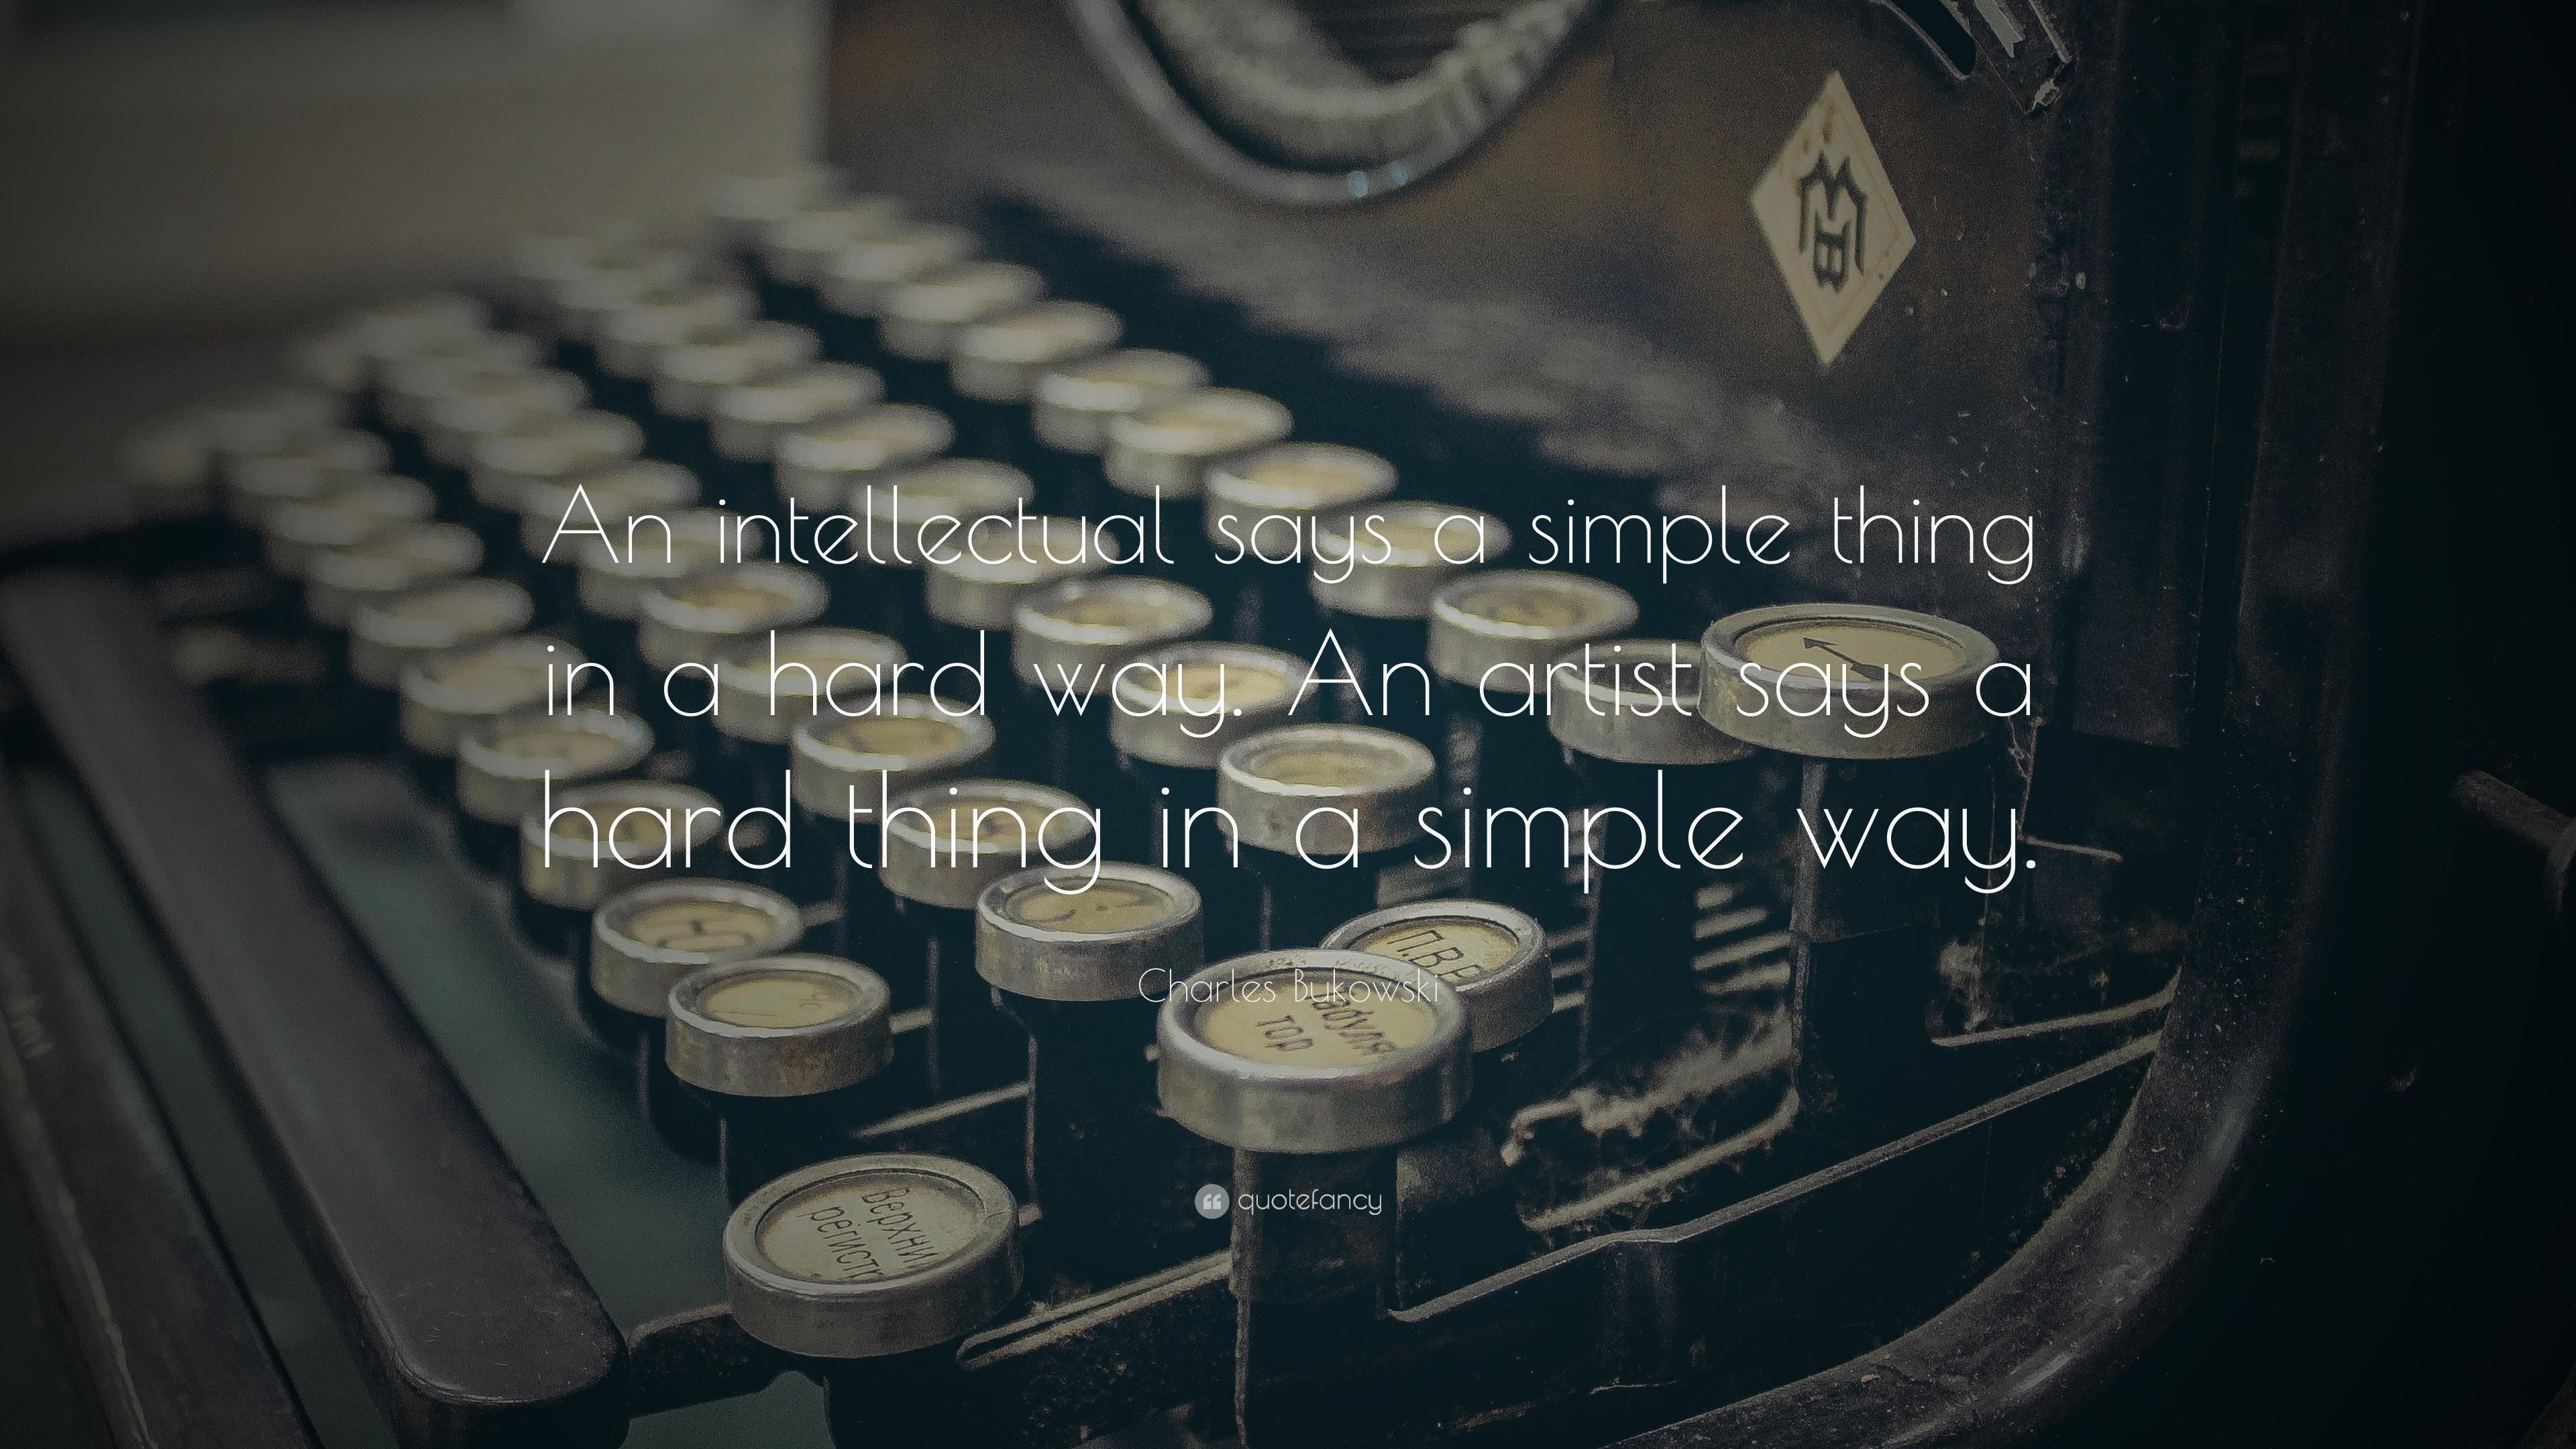 Charles Bukowski Quote: “An intellectual says a simple thing